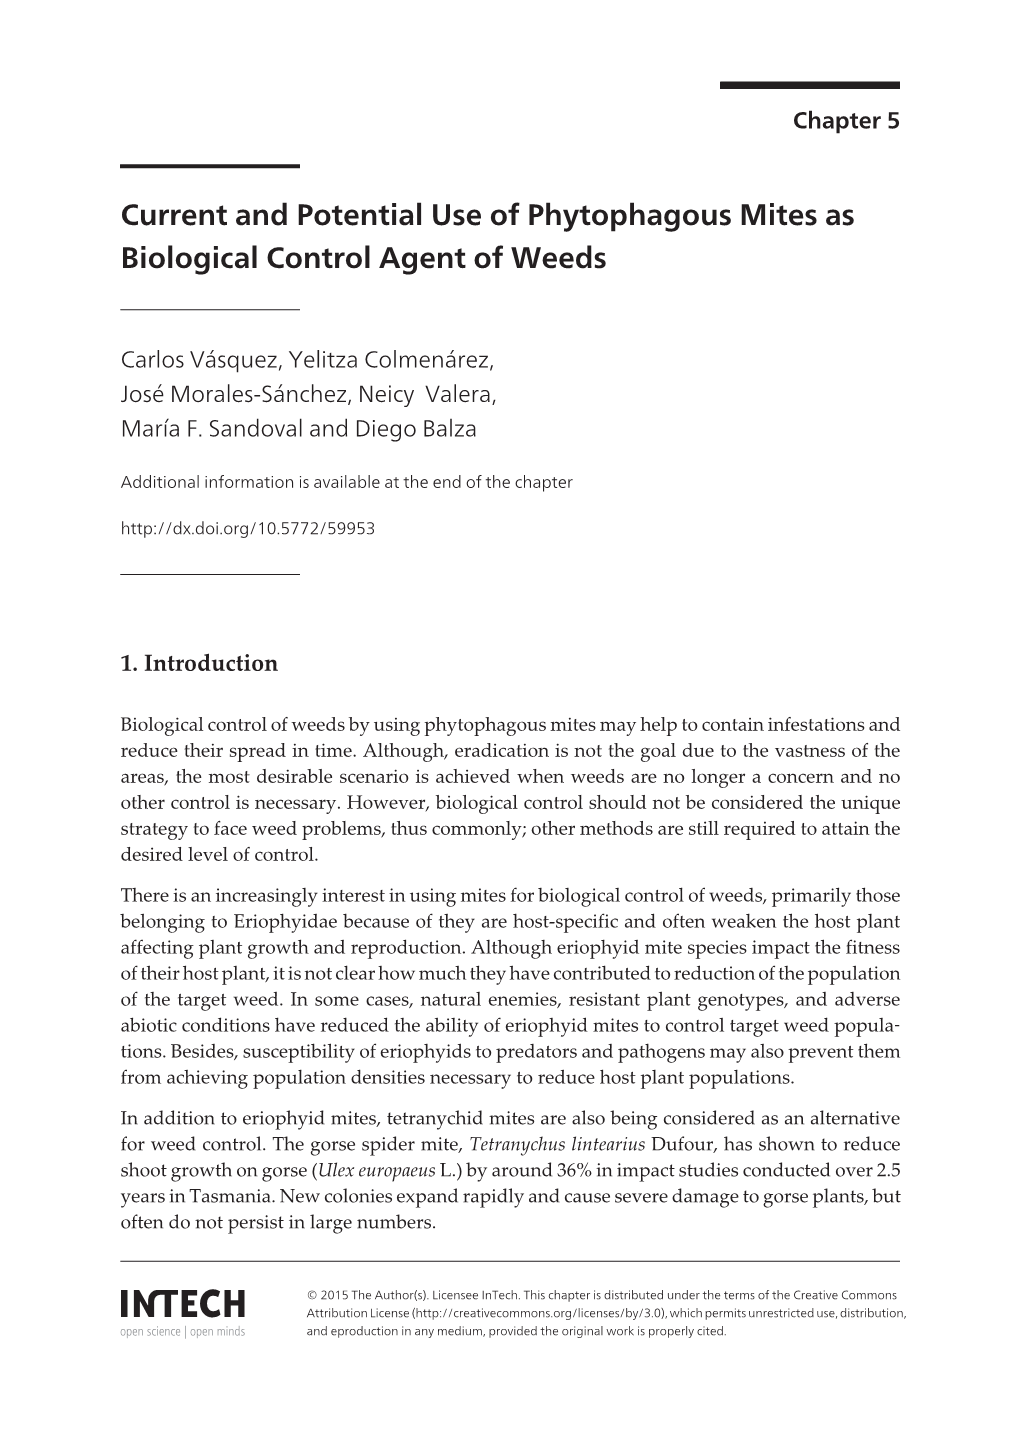 Current and Potential Use of Phytophagous Mites As Biological Control Agent of Weeds